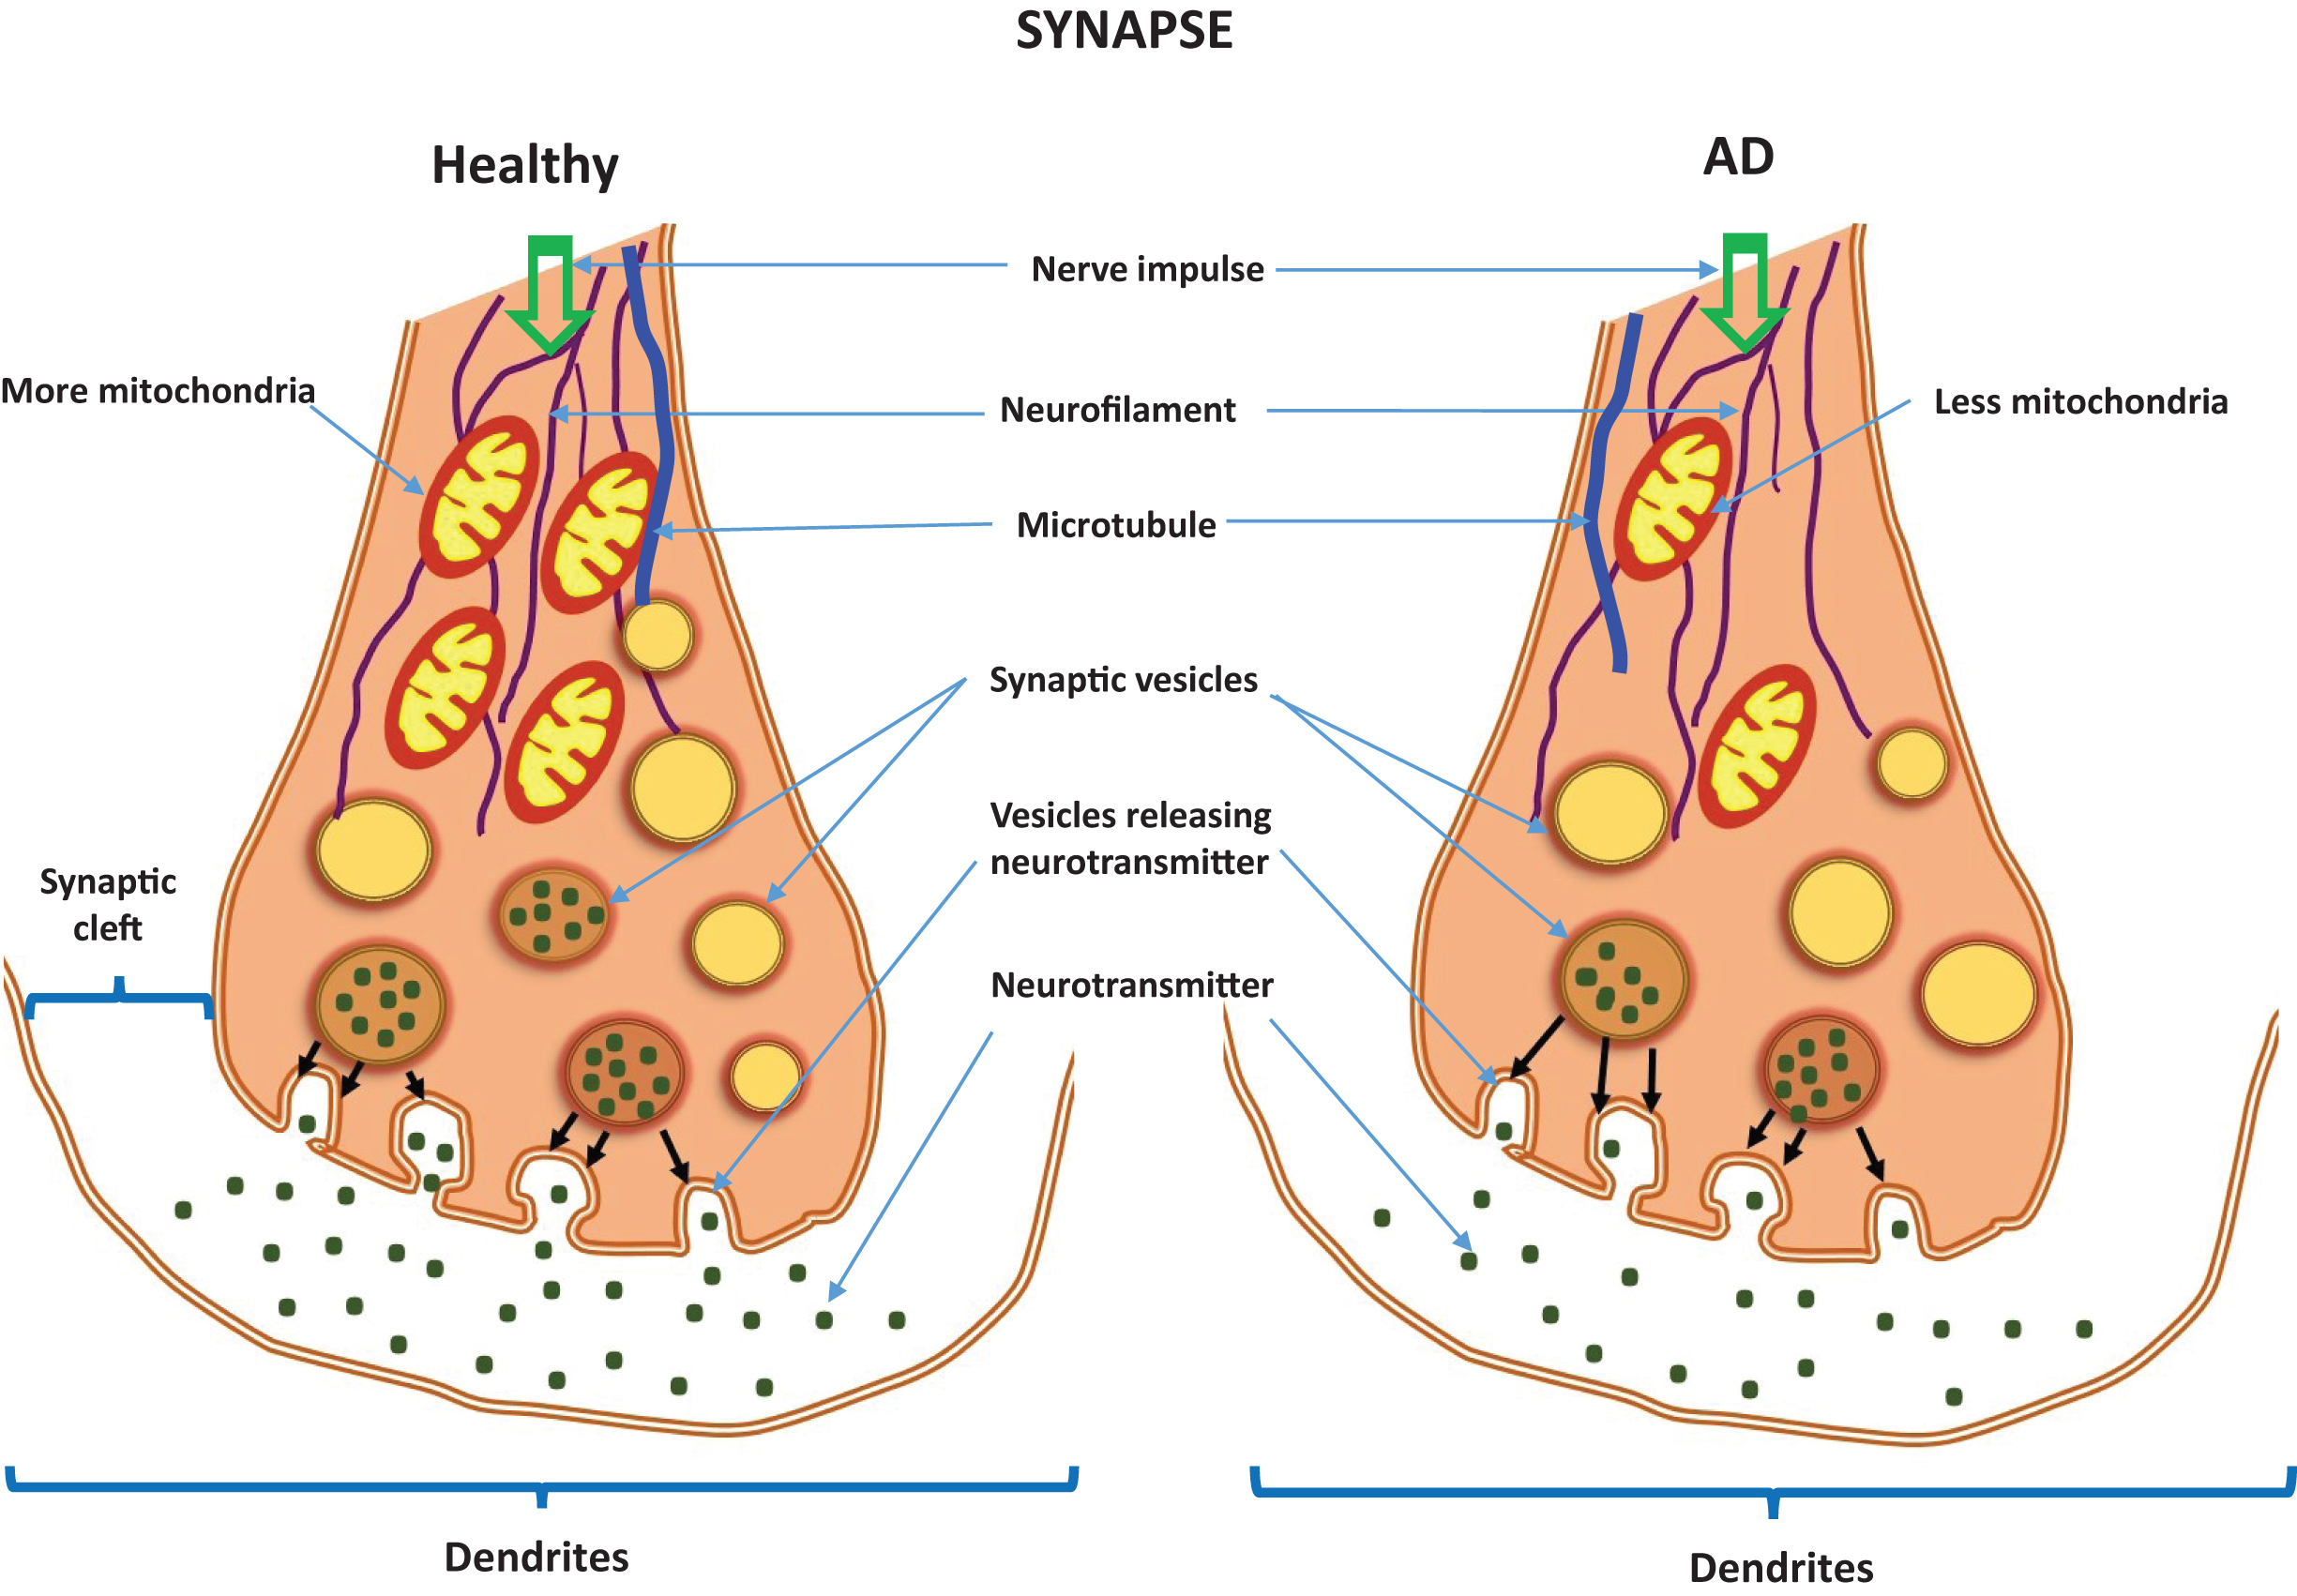 Neurotransmitters in a healthy synapse and an Alzheimer’s disease synapse.